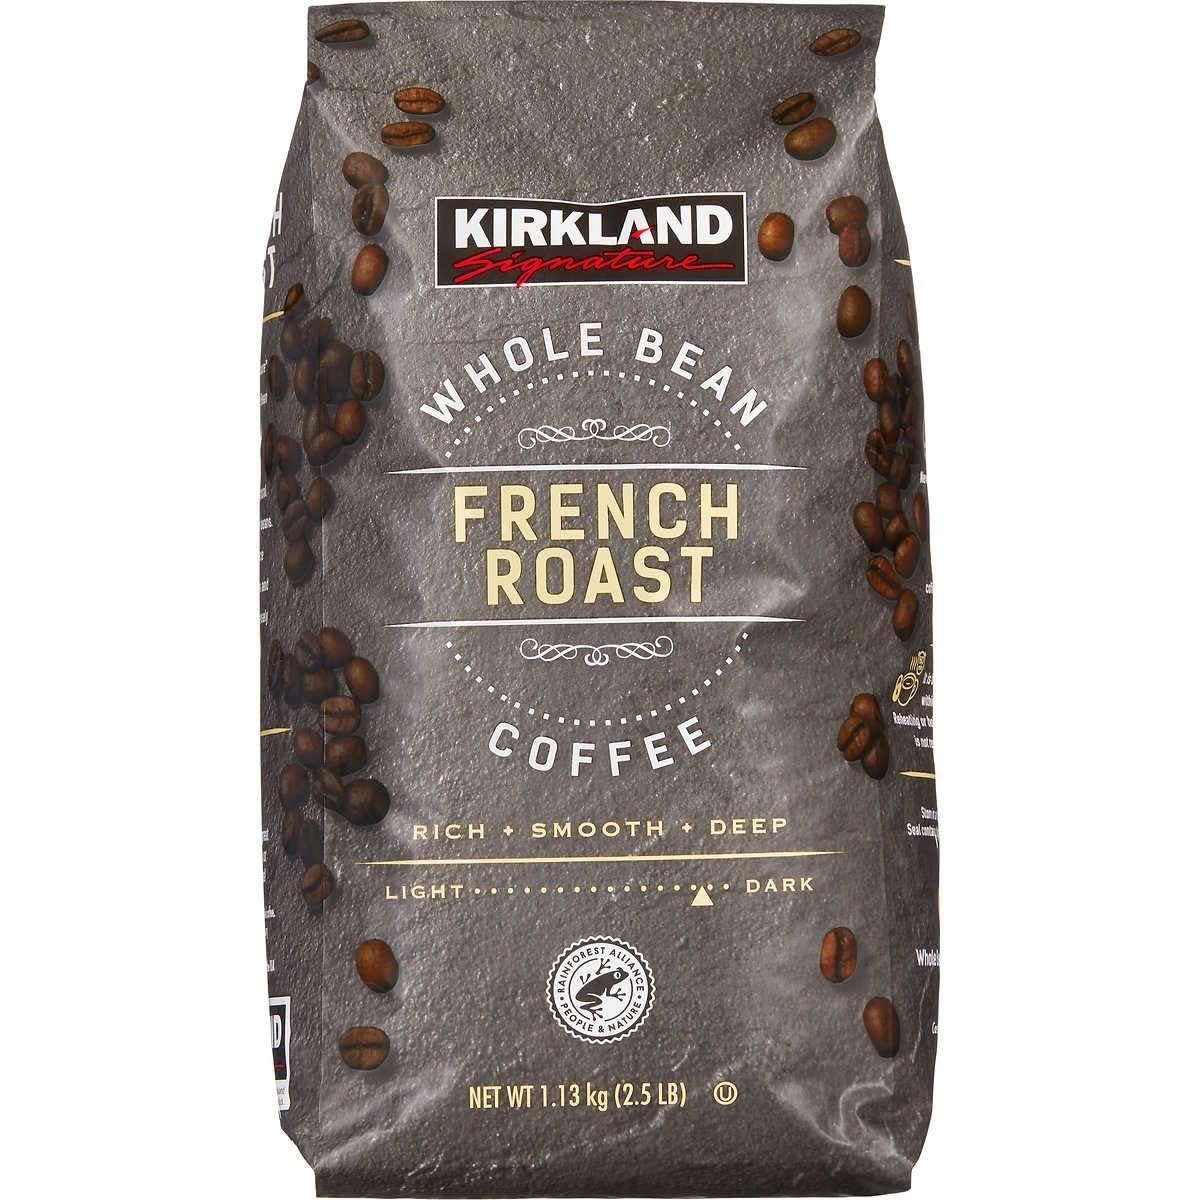 Let me tell you, I am a coffee snob. I dont easily get impressed when it comes to coffee, but my God, what incredible taste and aroma this Kirkland coffee has and compared to the ridiculous prices if others, this coffee not only hits the mark on taste and surpasses it, but the price is unbeatable. Pay your money for this one you will not be disappointed.